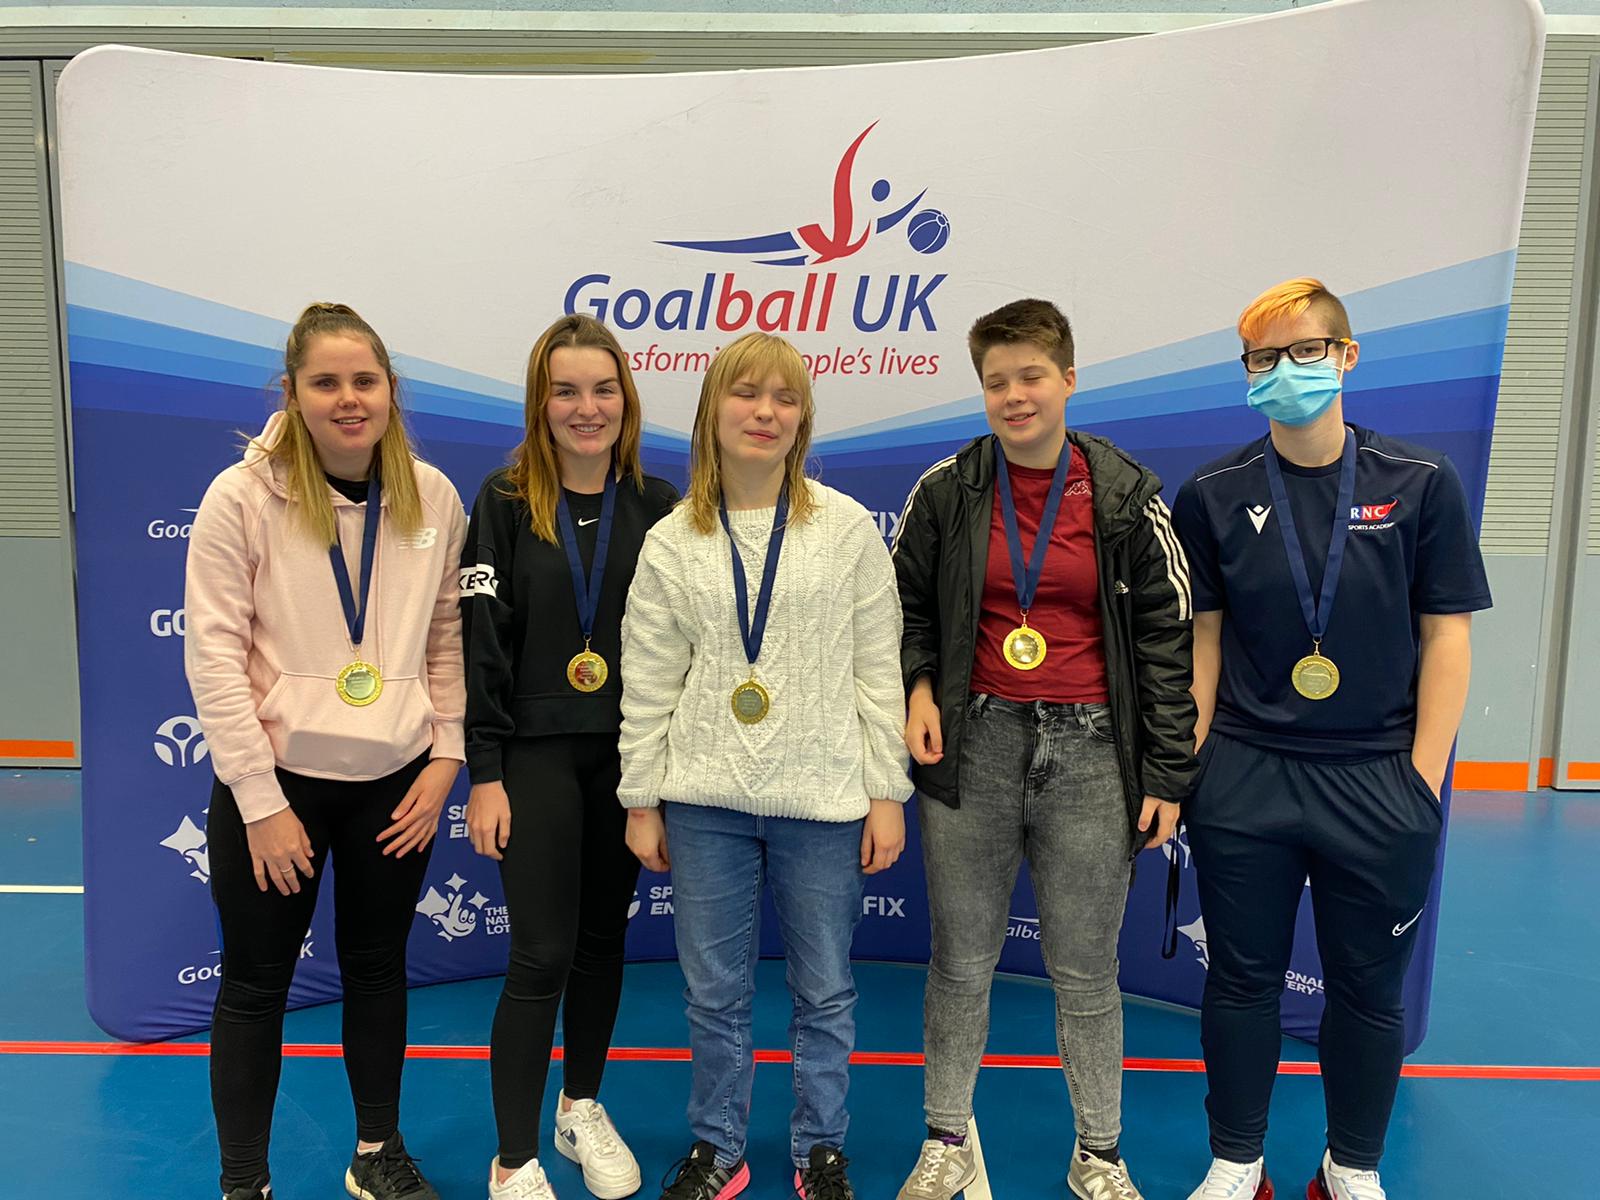 RNC Ladies regional team standing for their post competition gold medal photo. 4 players are in casual clothing with their coach Meme Robertson who is wearing a navy blue RNC training tracksuit.